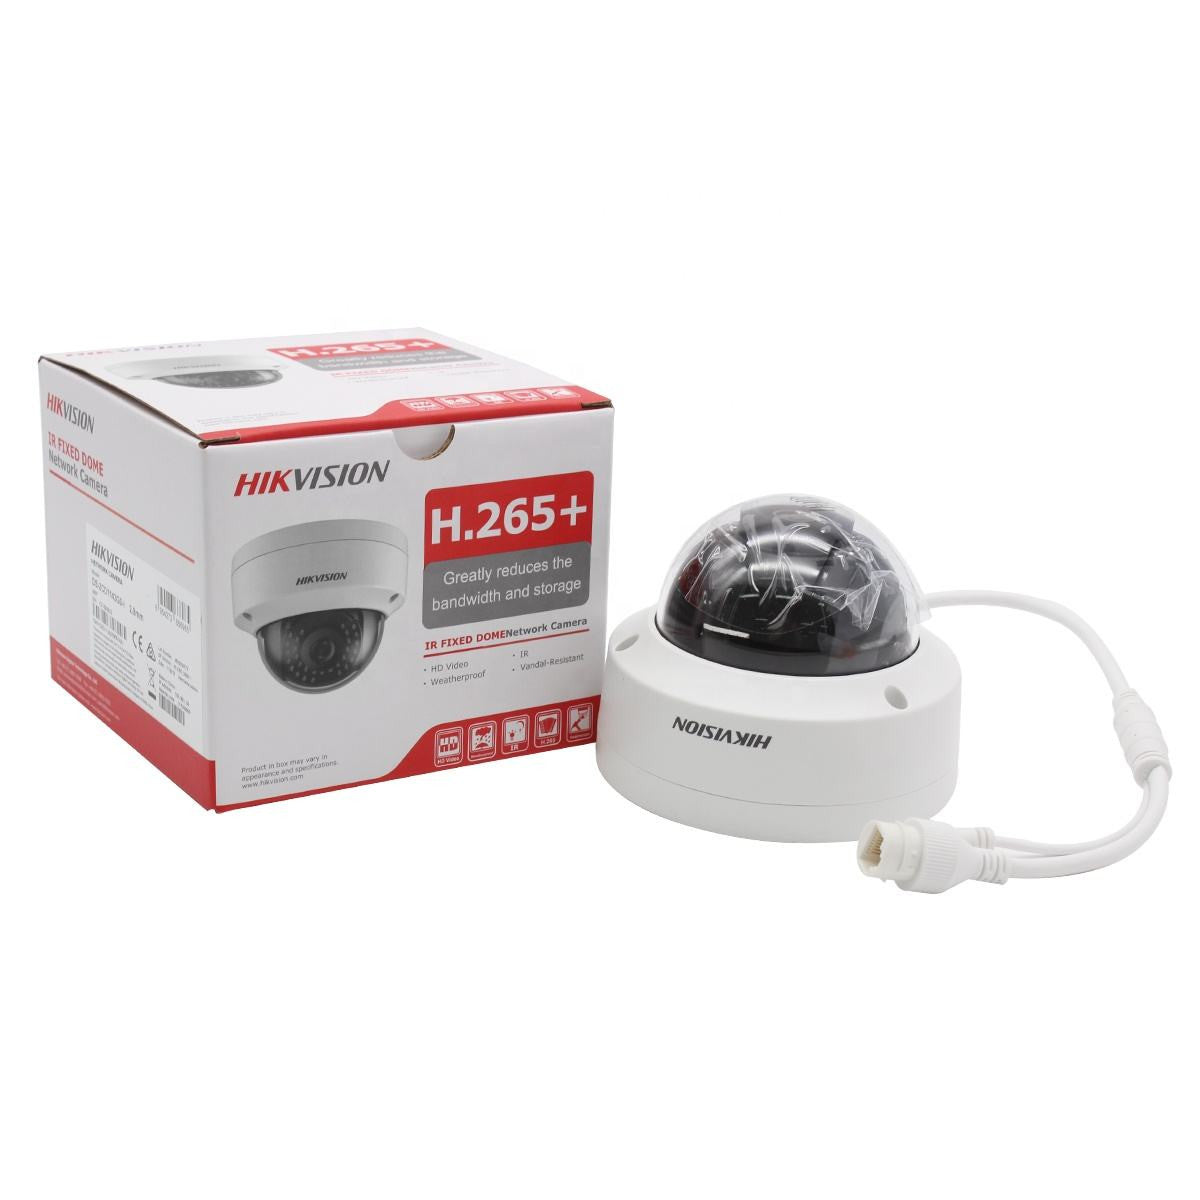 Hikvision 4MP IP Camera DS-2CD1143G0-I POE Dome Network Security Camera-1